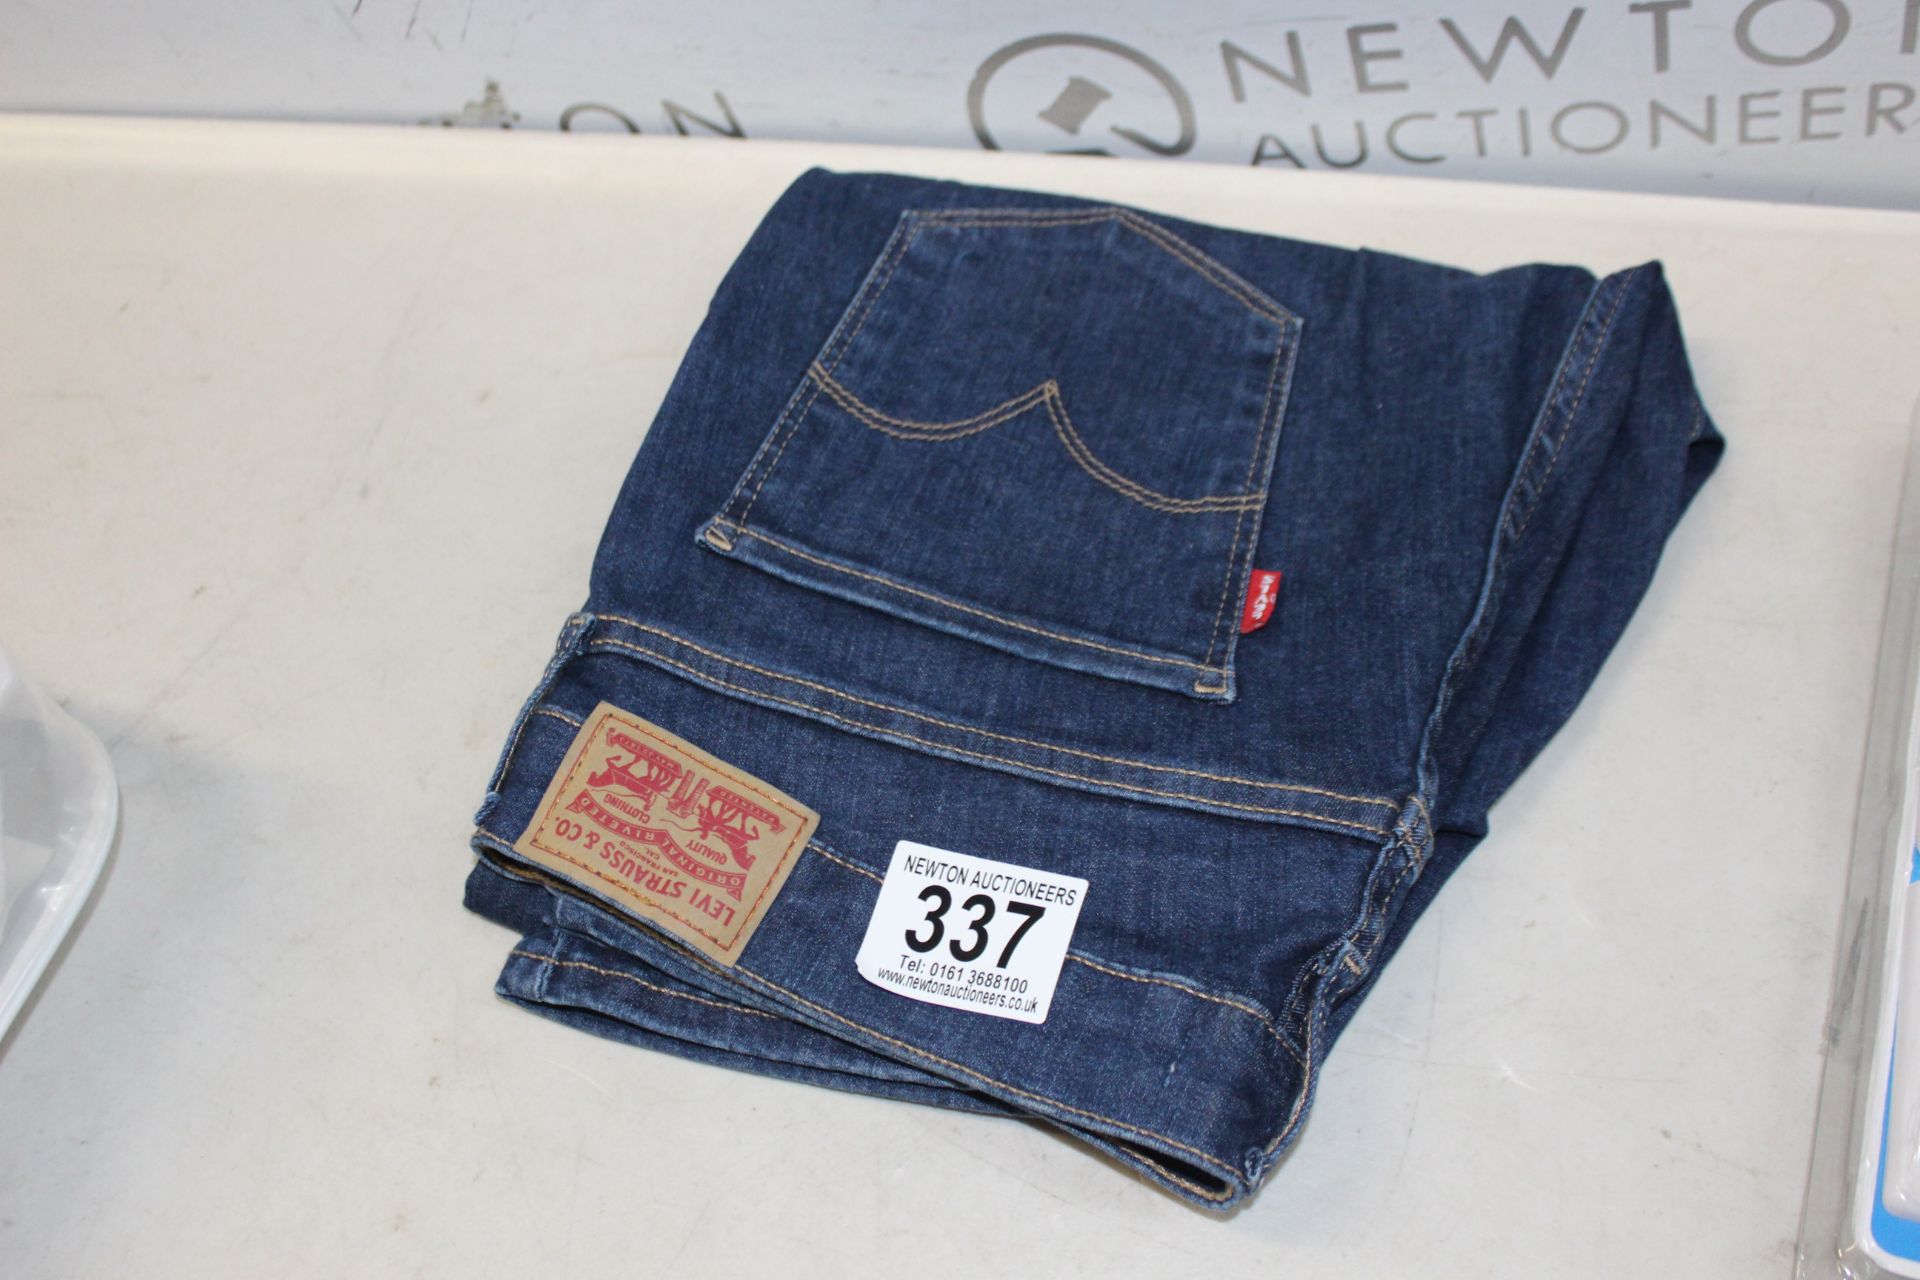 1 LEVIS 311 SHAPING SKINNY JEANS SIZE W32 L32 RRP Â£49